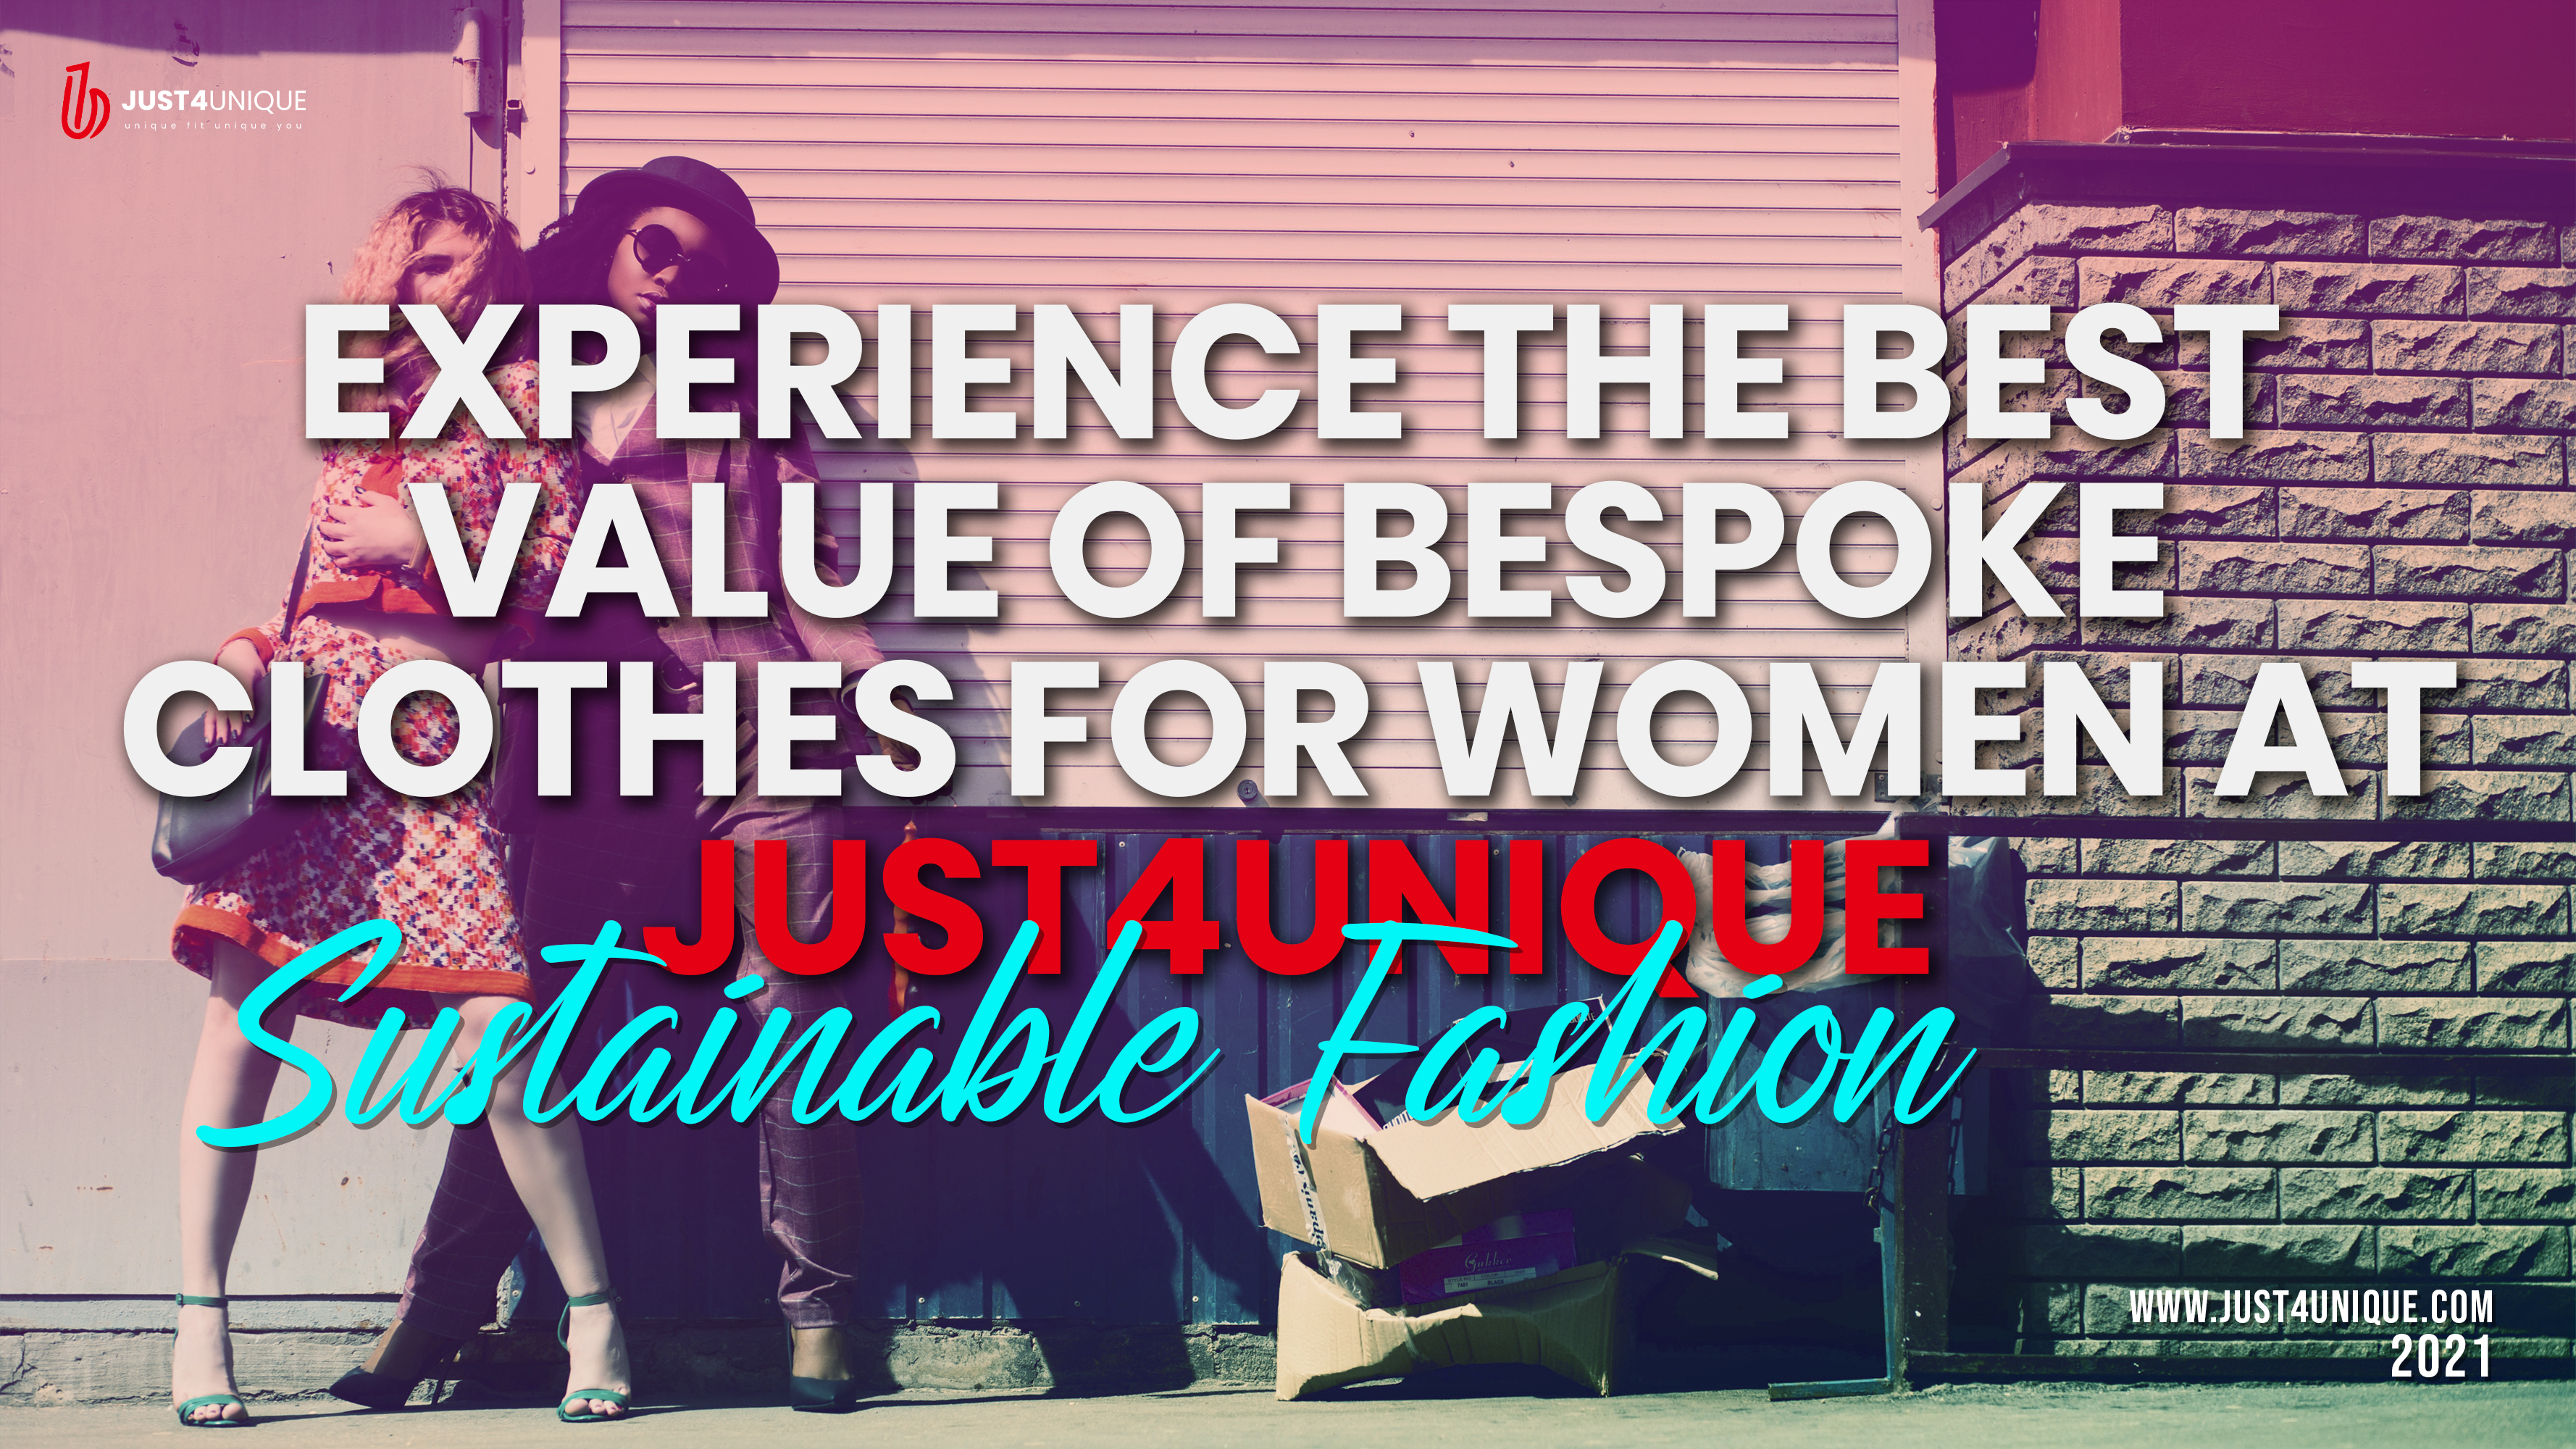 Experience the Best Value of Bespoke Clothes for Women at Just4Unique